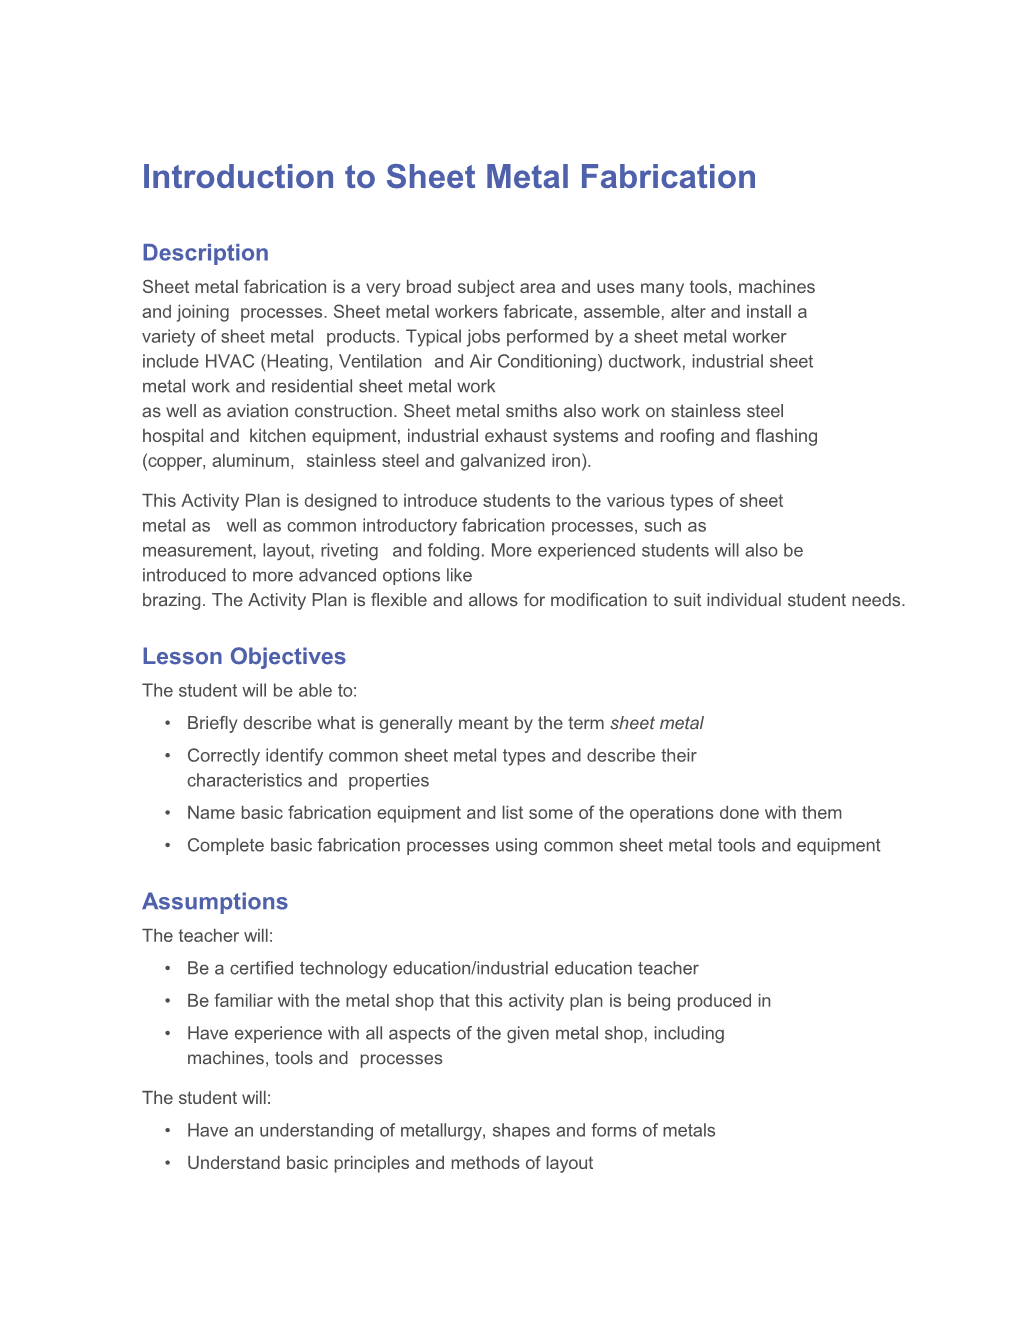 Sheet Metal Fabrication Is Avery Broad Subject Area and Uses